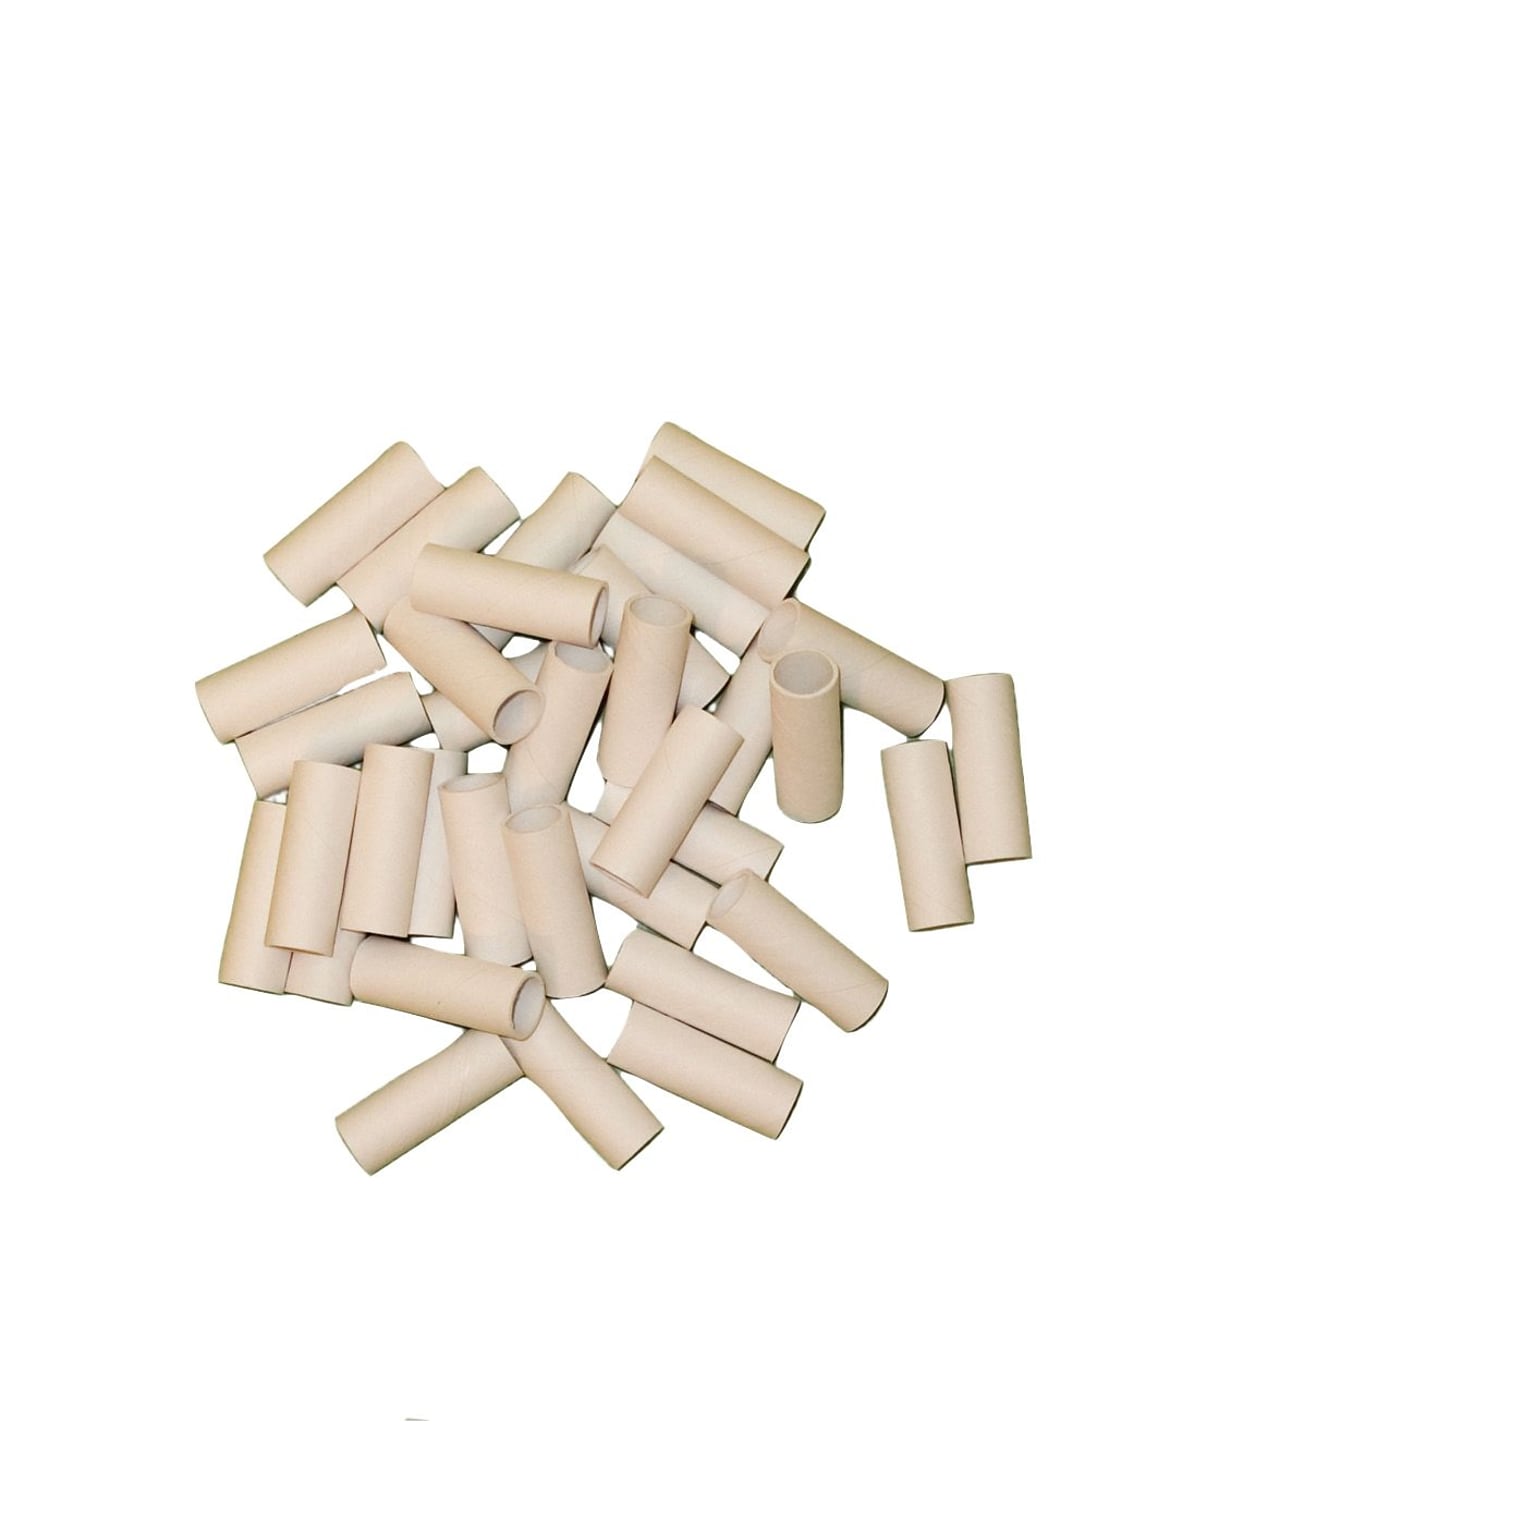 Additional Mouthpieces for Buhl Spirometer (250 Pieces), Disposable Cardboard